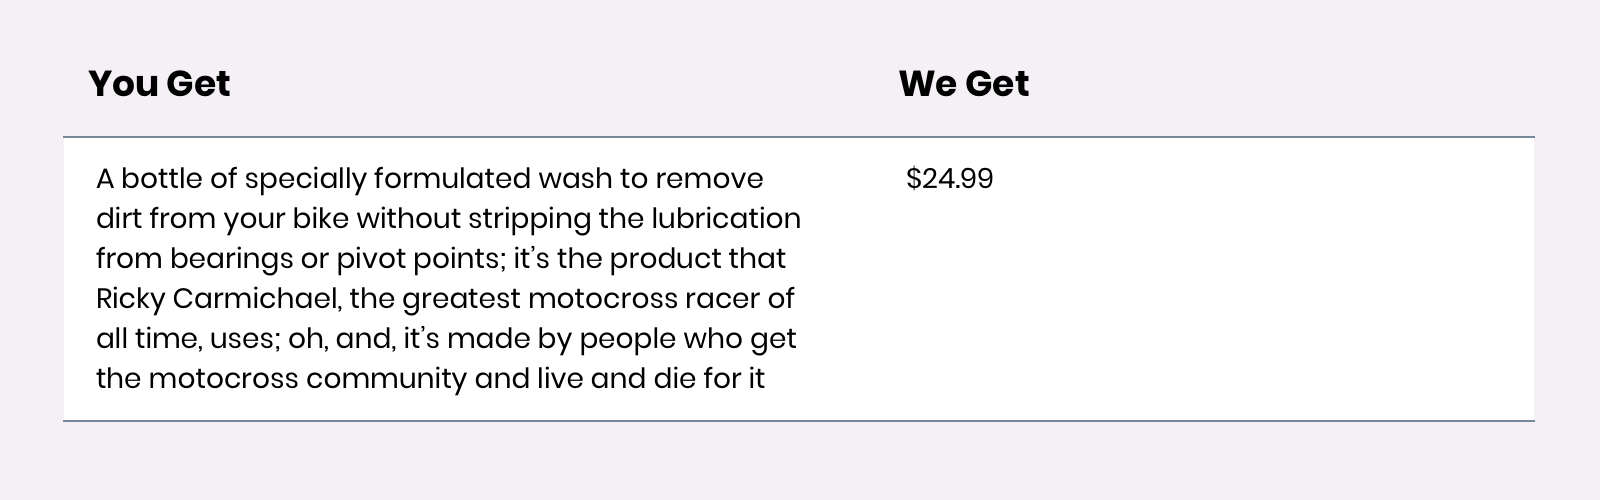 You either get: A bottle of specially formulated wash to remove dirt from your bike without stripping the lubrication from bearings or pivot points; it’s the product that Ricky Carmichael, the greatest motocross racer of all time, uses; oh, and, it’s made by people who get the motocross community and live and die for it. We get: $24.99.